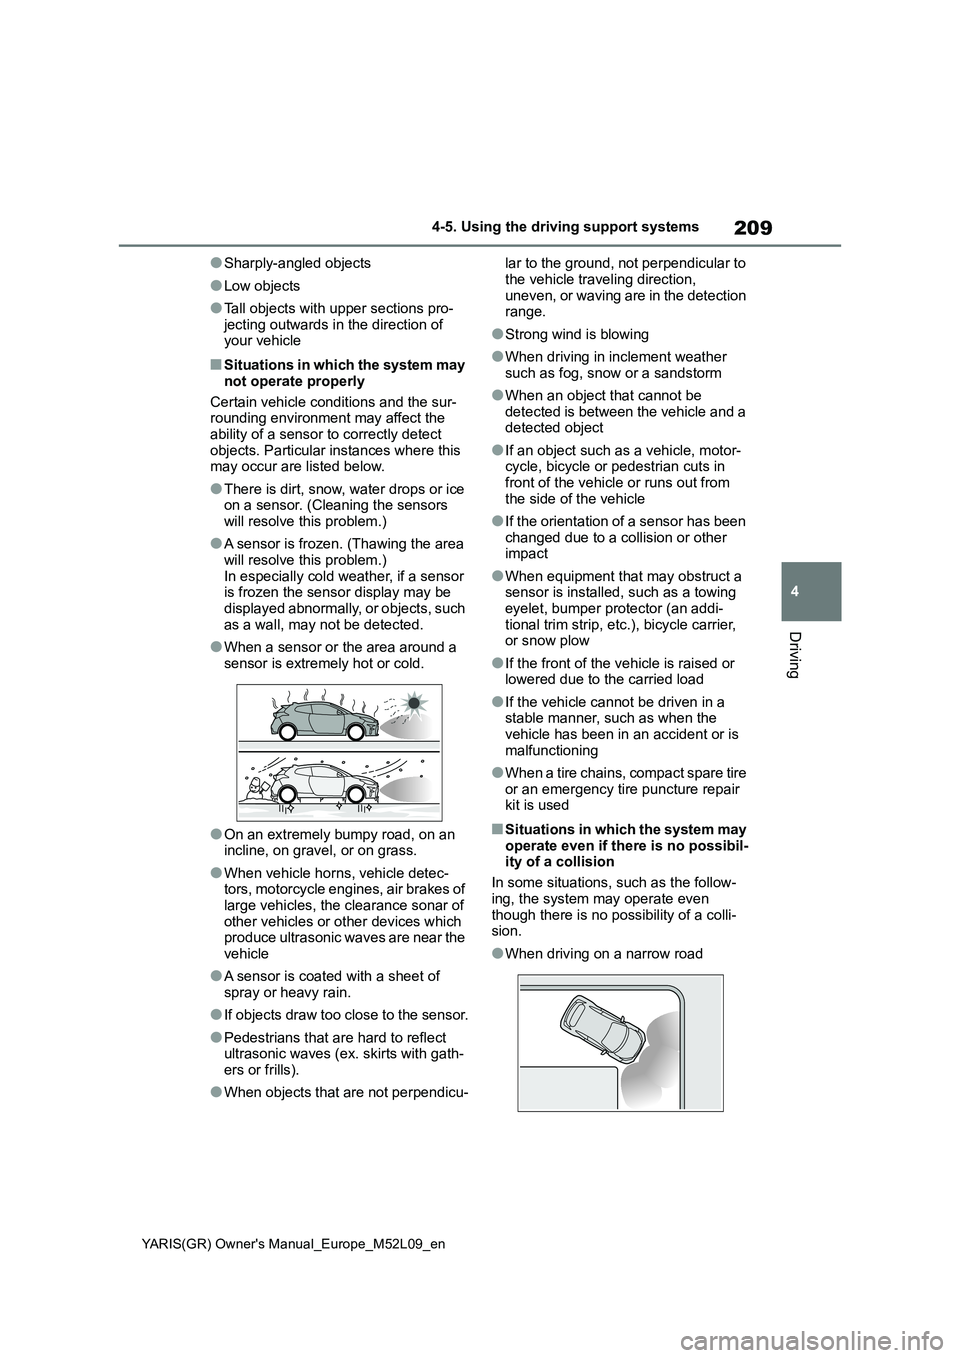 TOYOTA GR YARIS 2020  Owners Manual (in English) 209
4
YARIS(GR) Owners Manual_Europe_M52L09_en
4-5. Using the driving support systems
Driving
●Sharply-angled objects
●Low objects
●Tall objects with upper sections pro-
jecting outwards in the